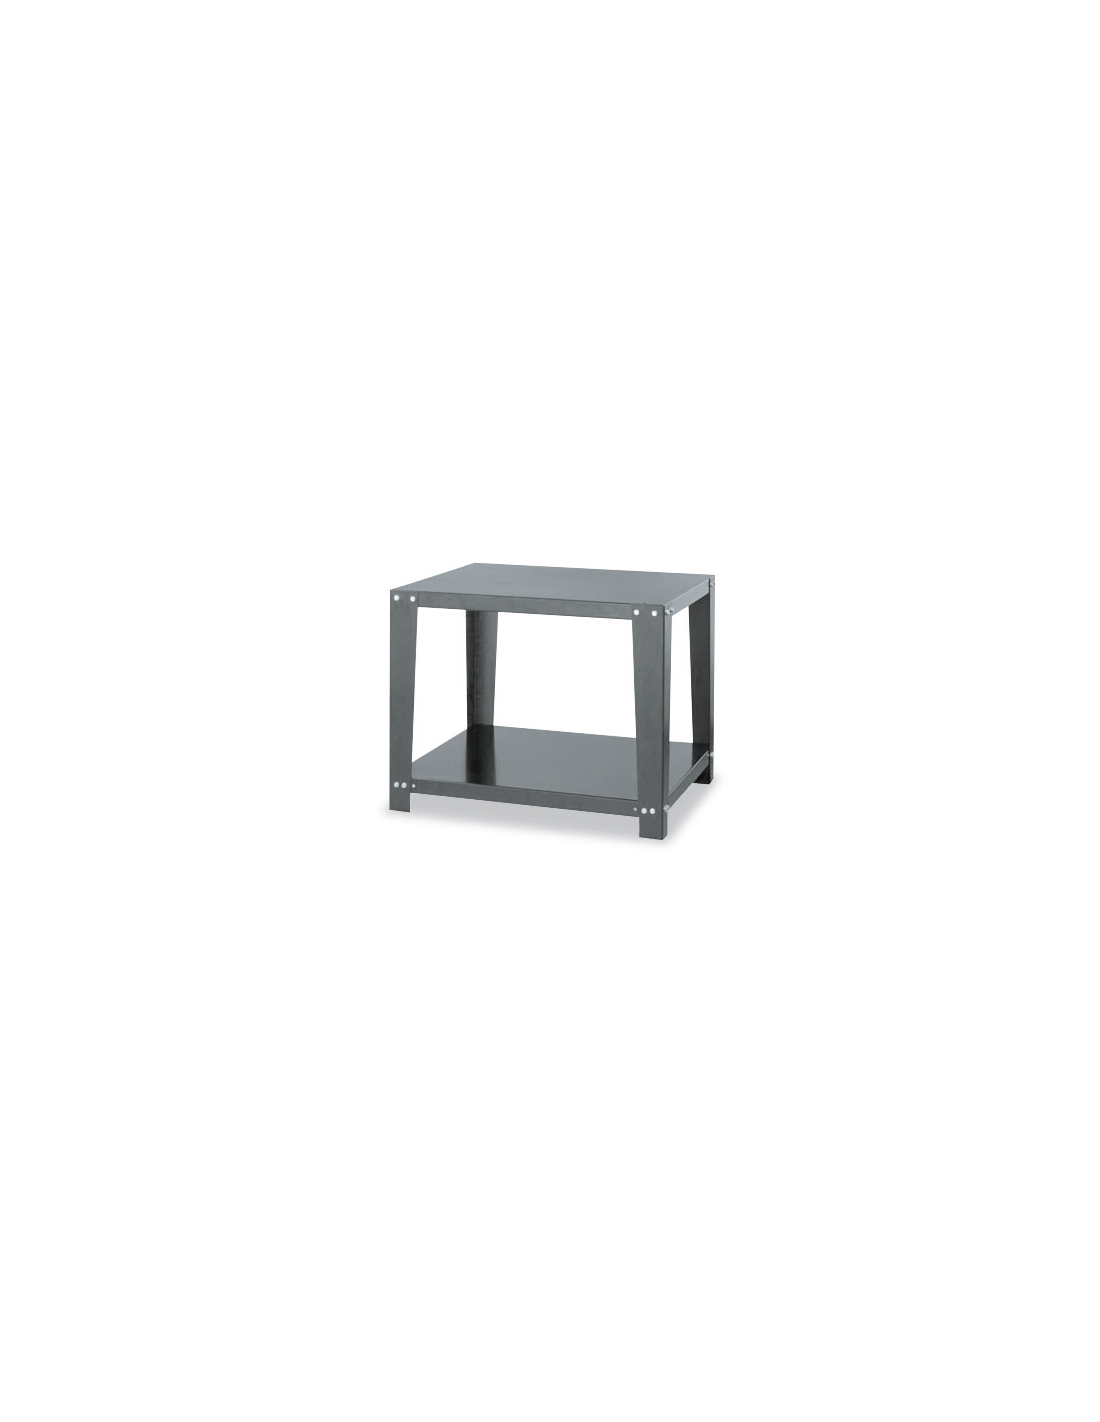 Gas oven support GX96